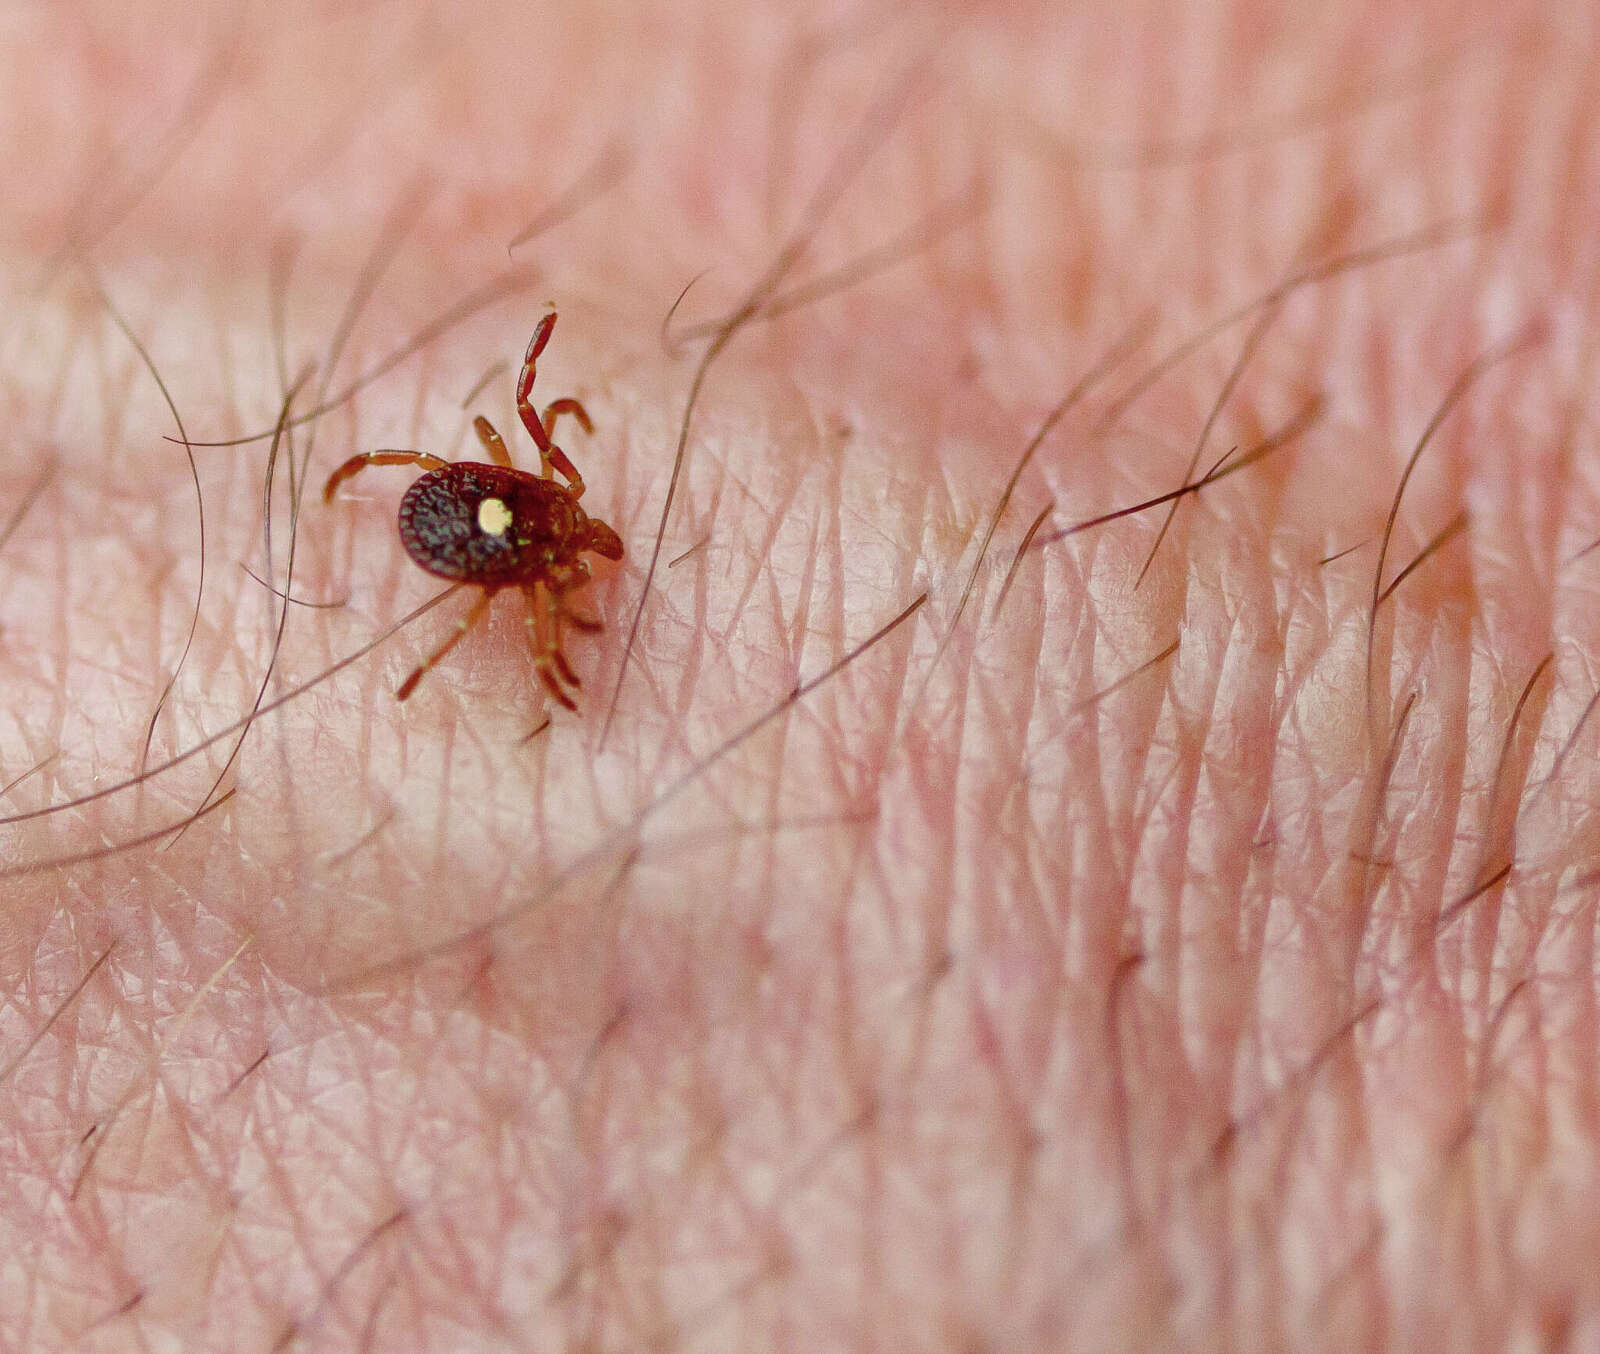 An image of a tick.